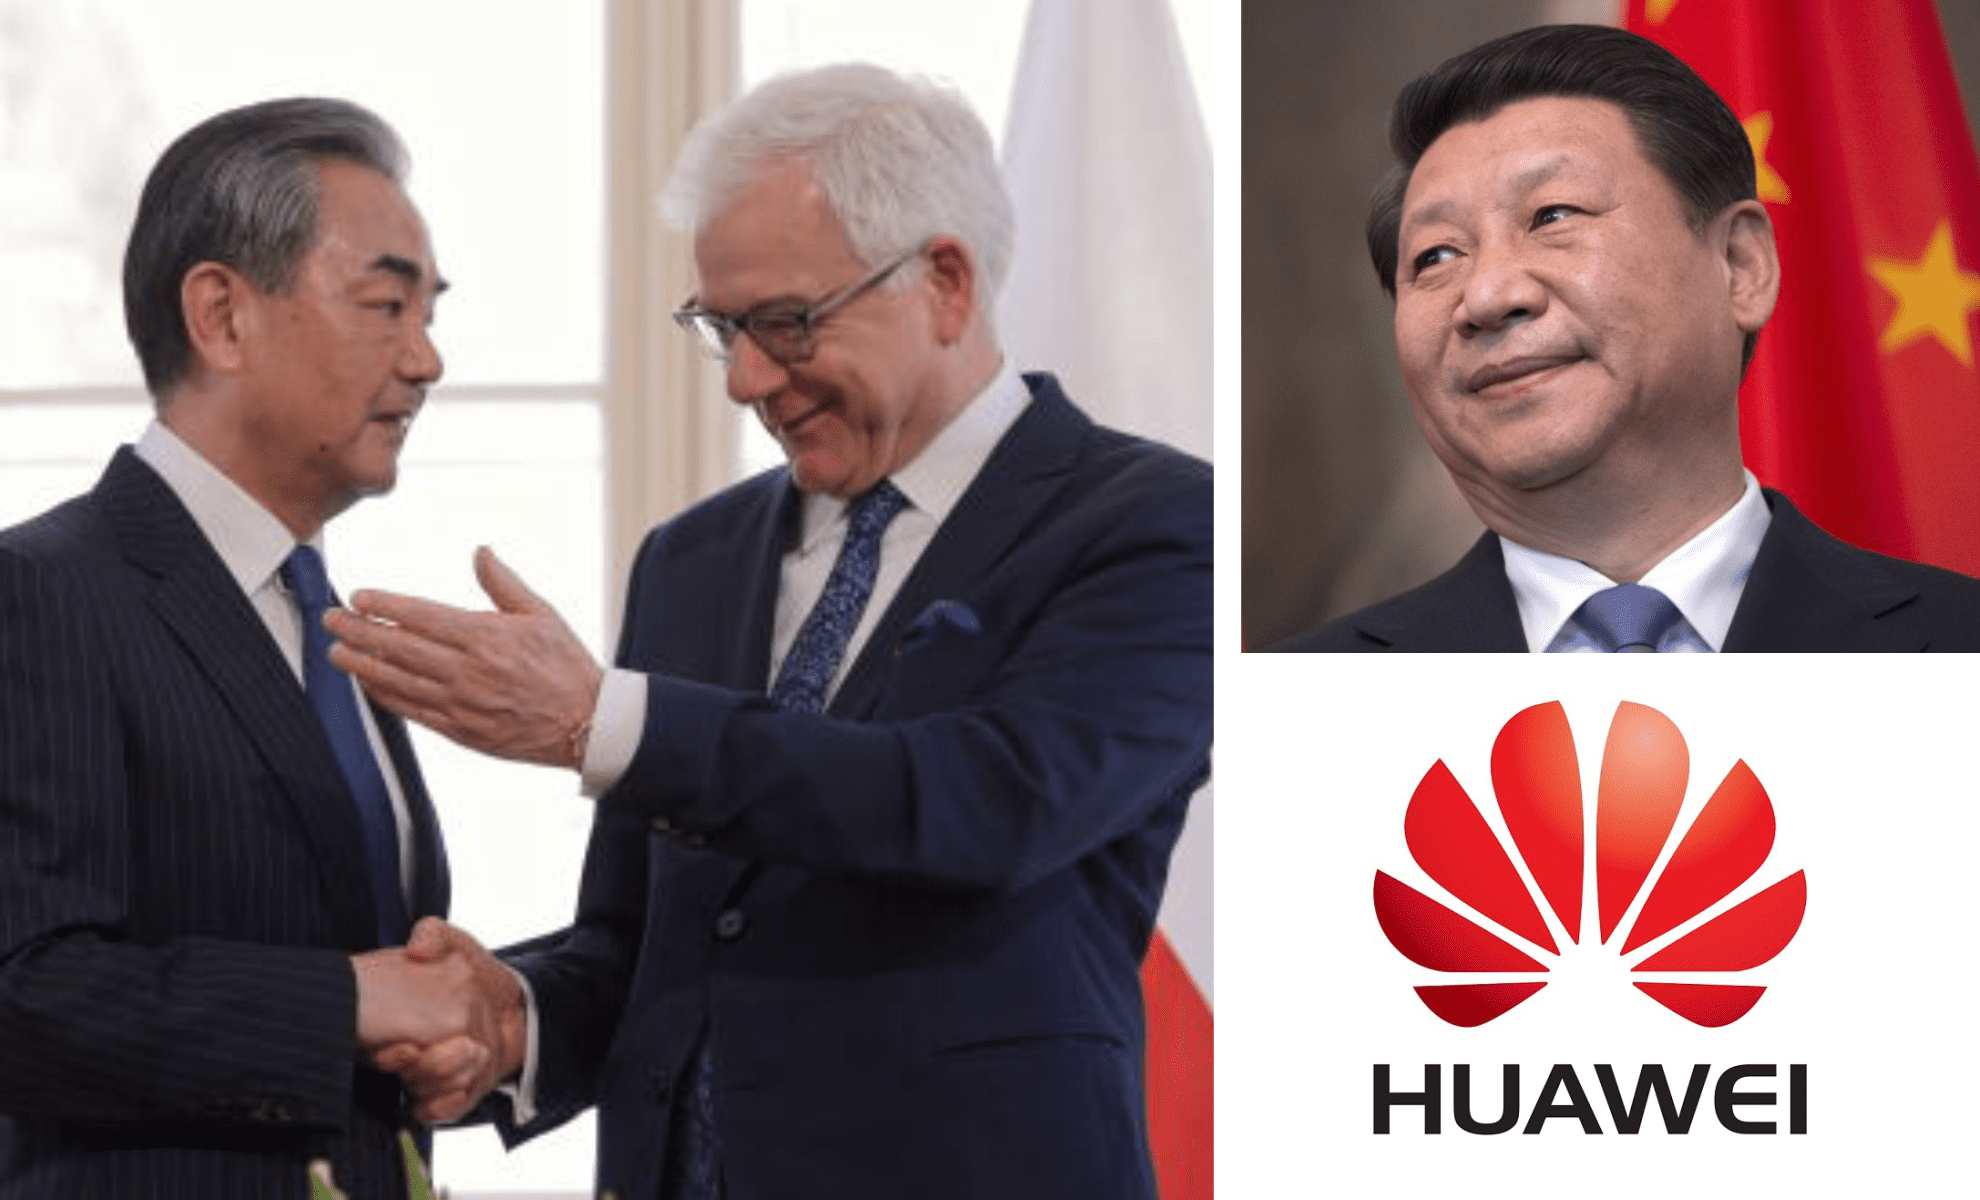 POLAND WILL NOT EXCLUDE THE CHINESE COMMUNIST COMPANY HUAWEI FROM BUILDING THE 5G NETWORK!